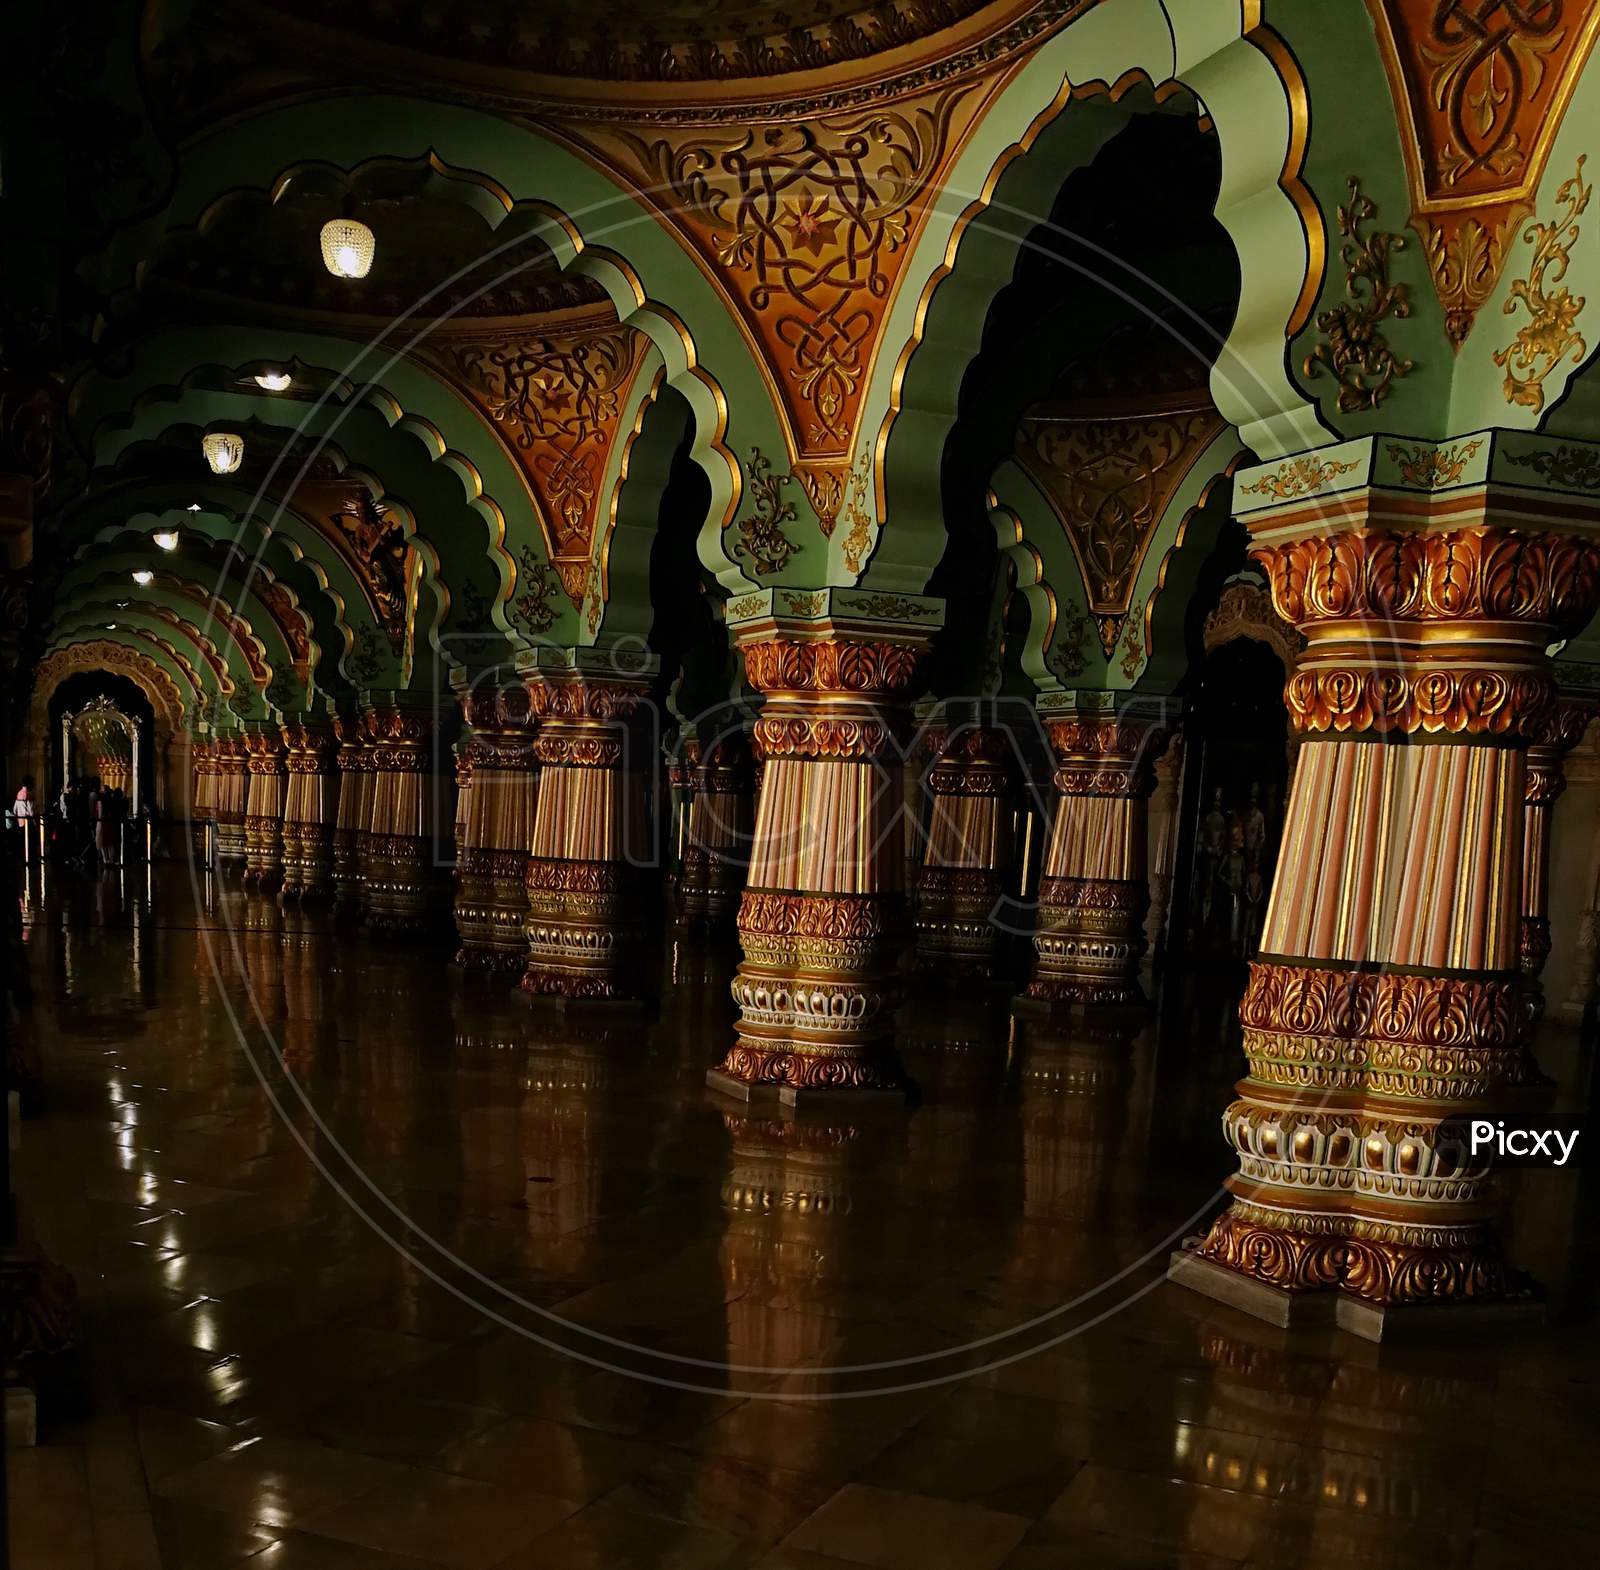 Pillars of a palace and its reflection on the floor with beautiful architecture work